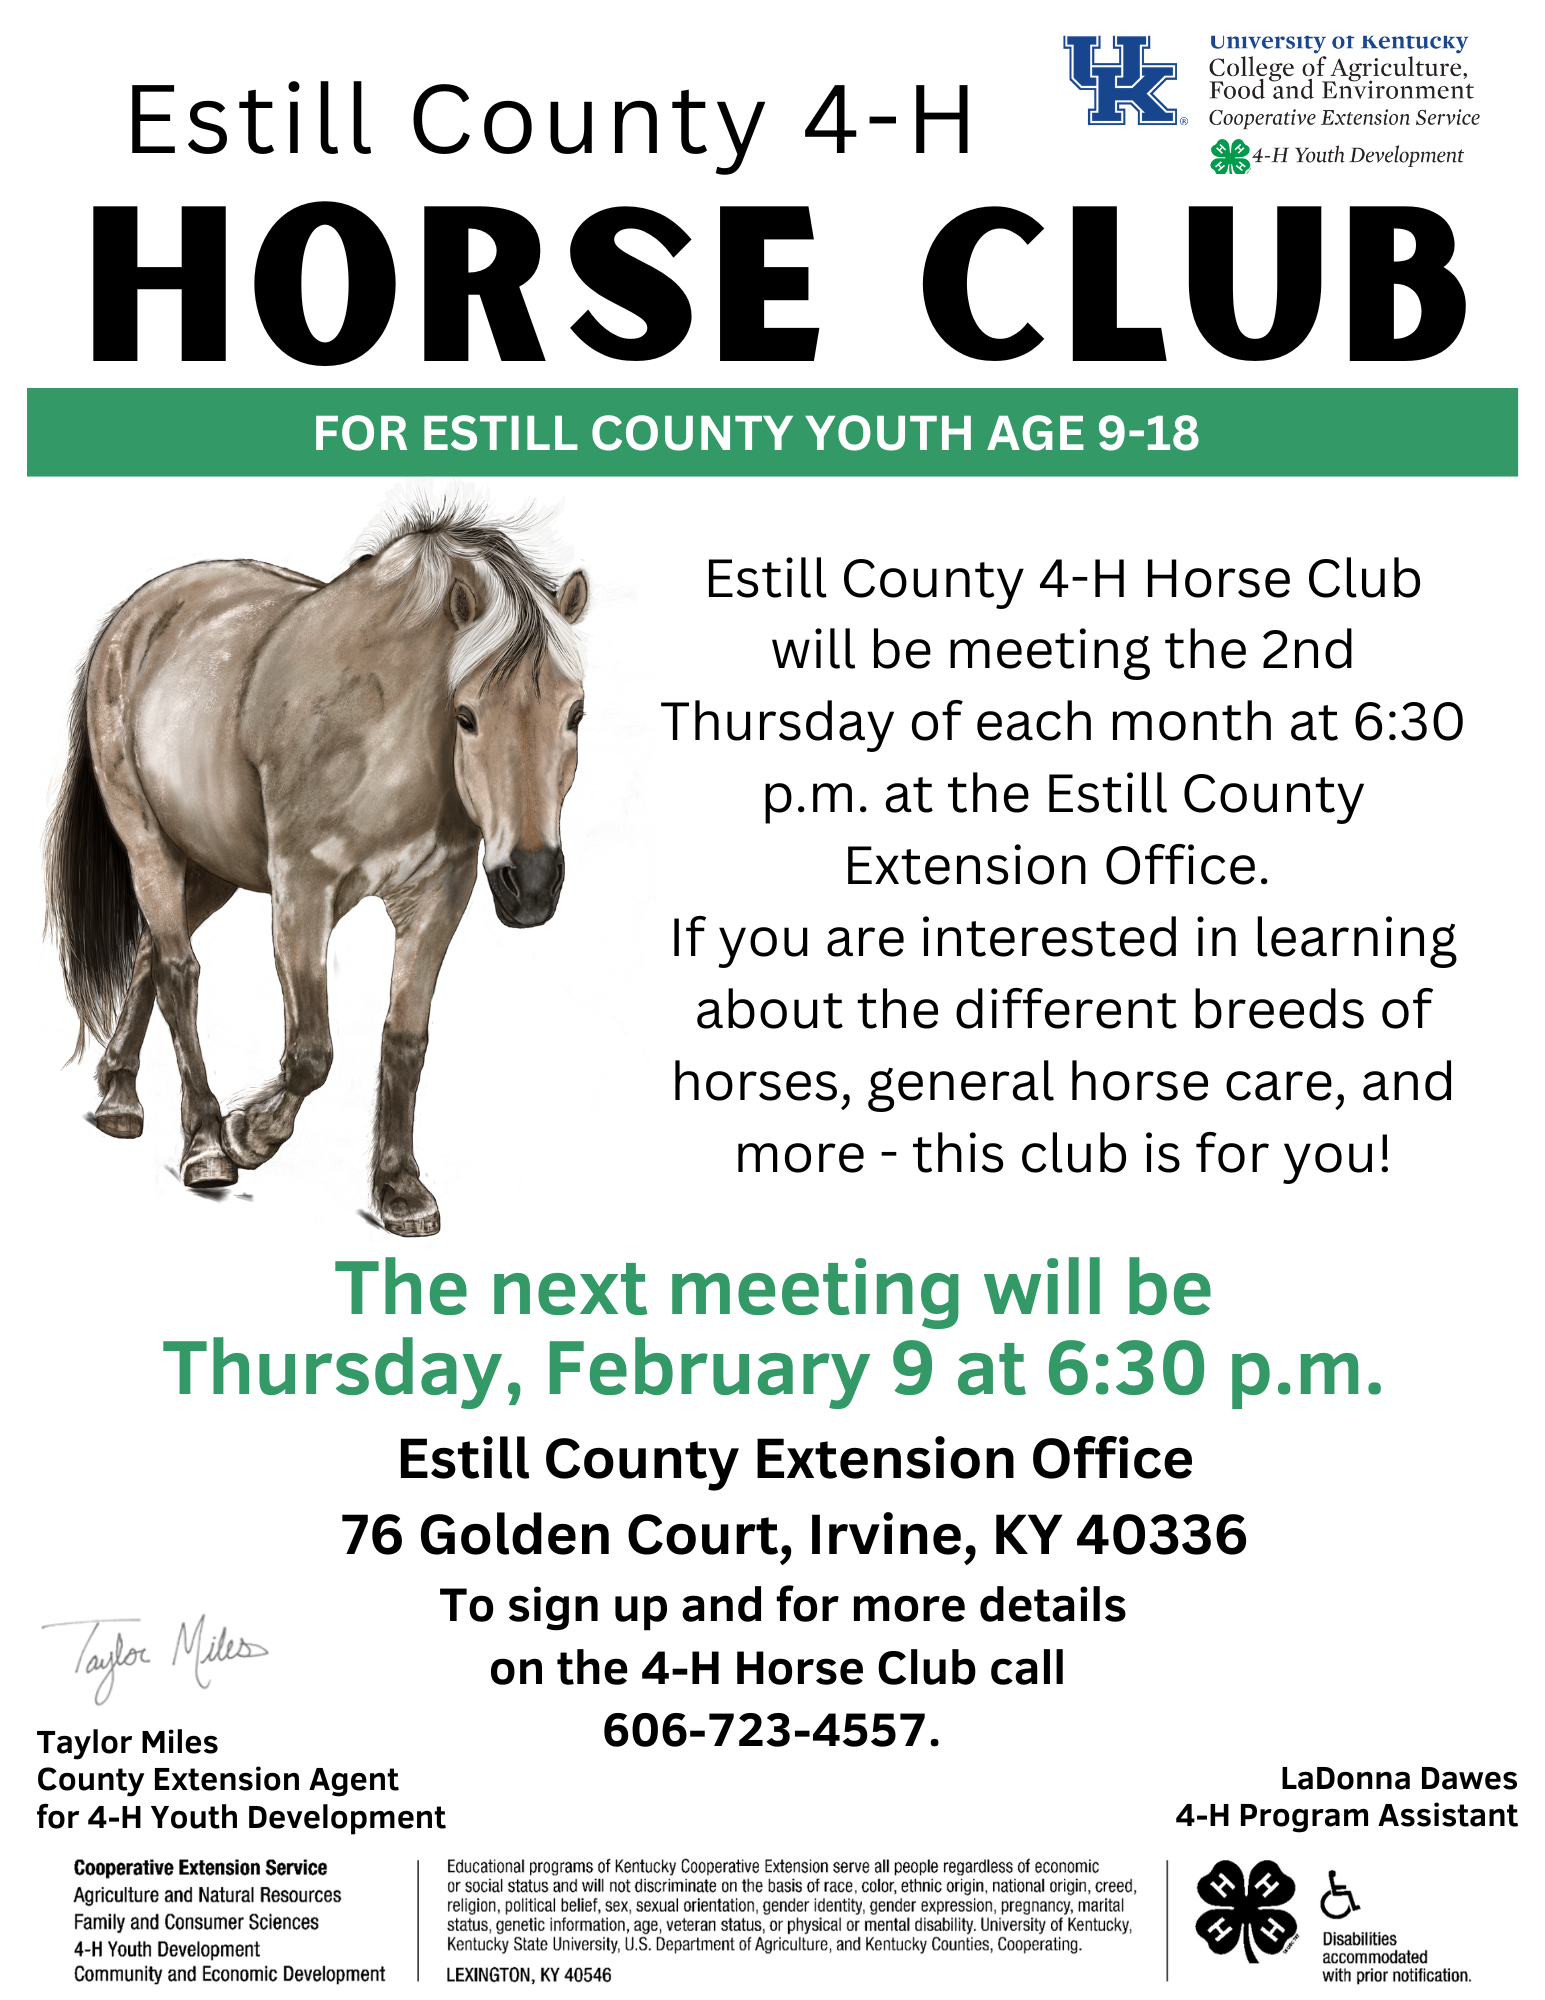 4-H Horse Club Interest flyer for upcoming February meeting